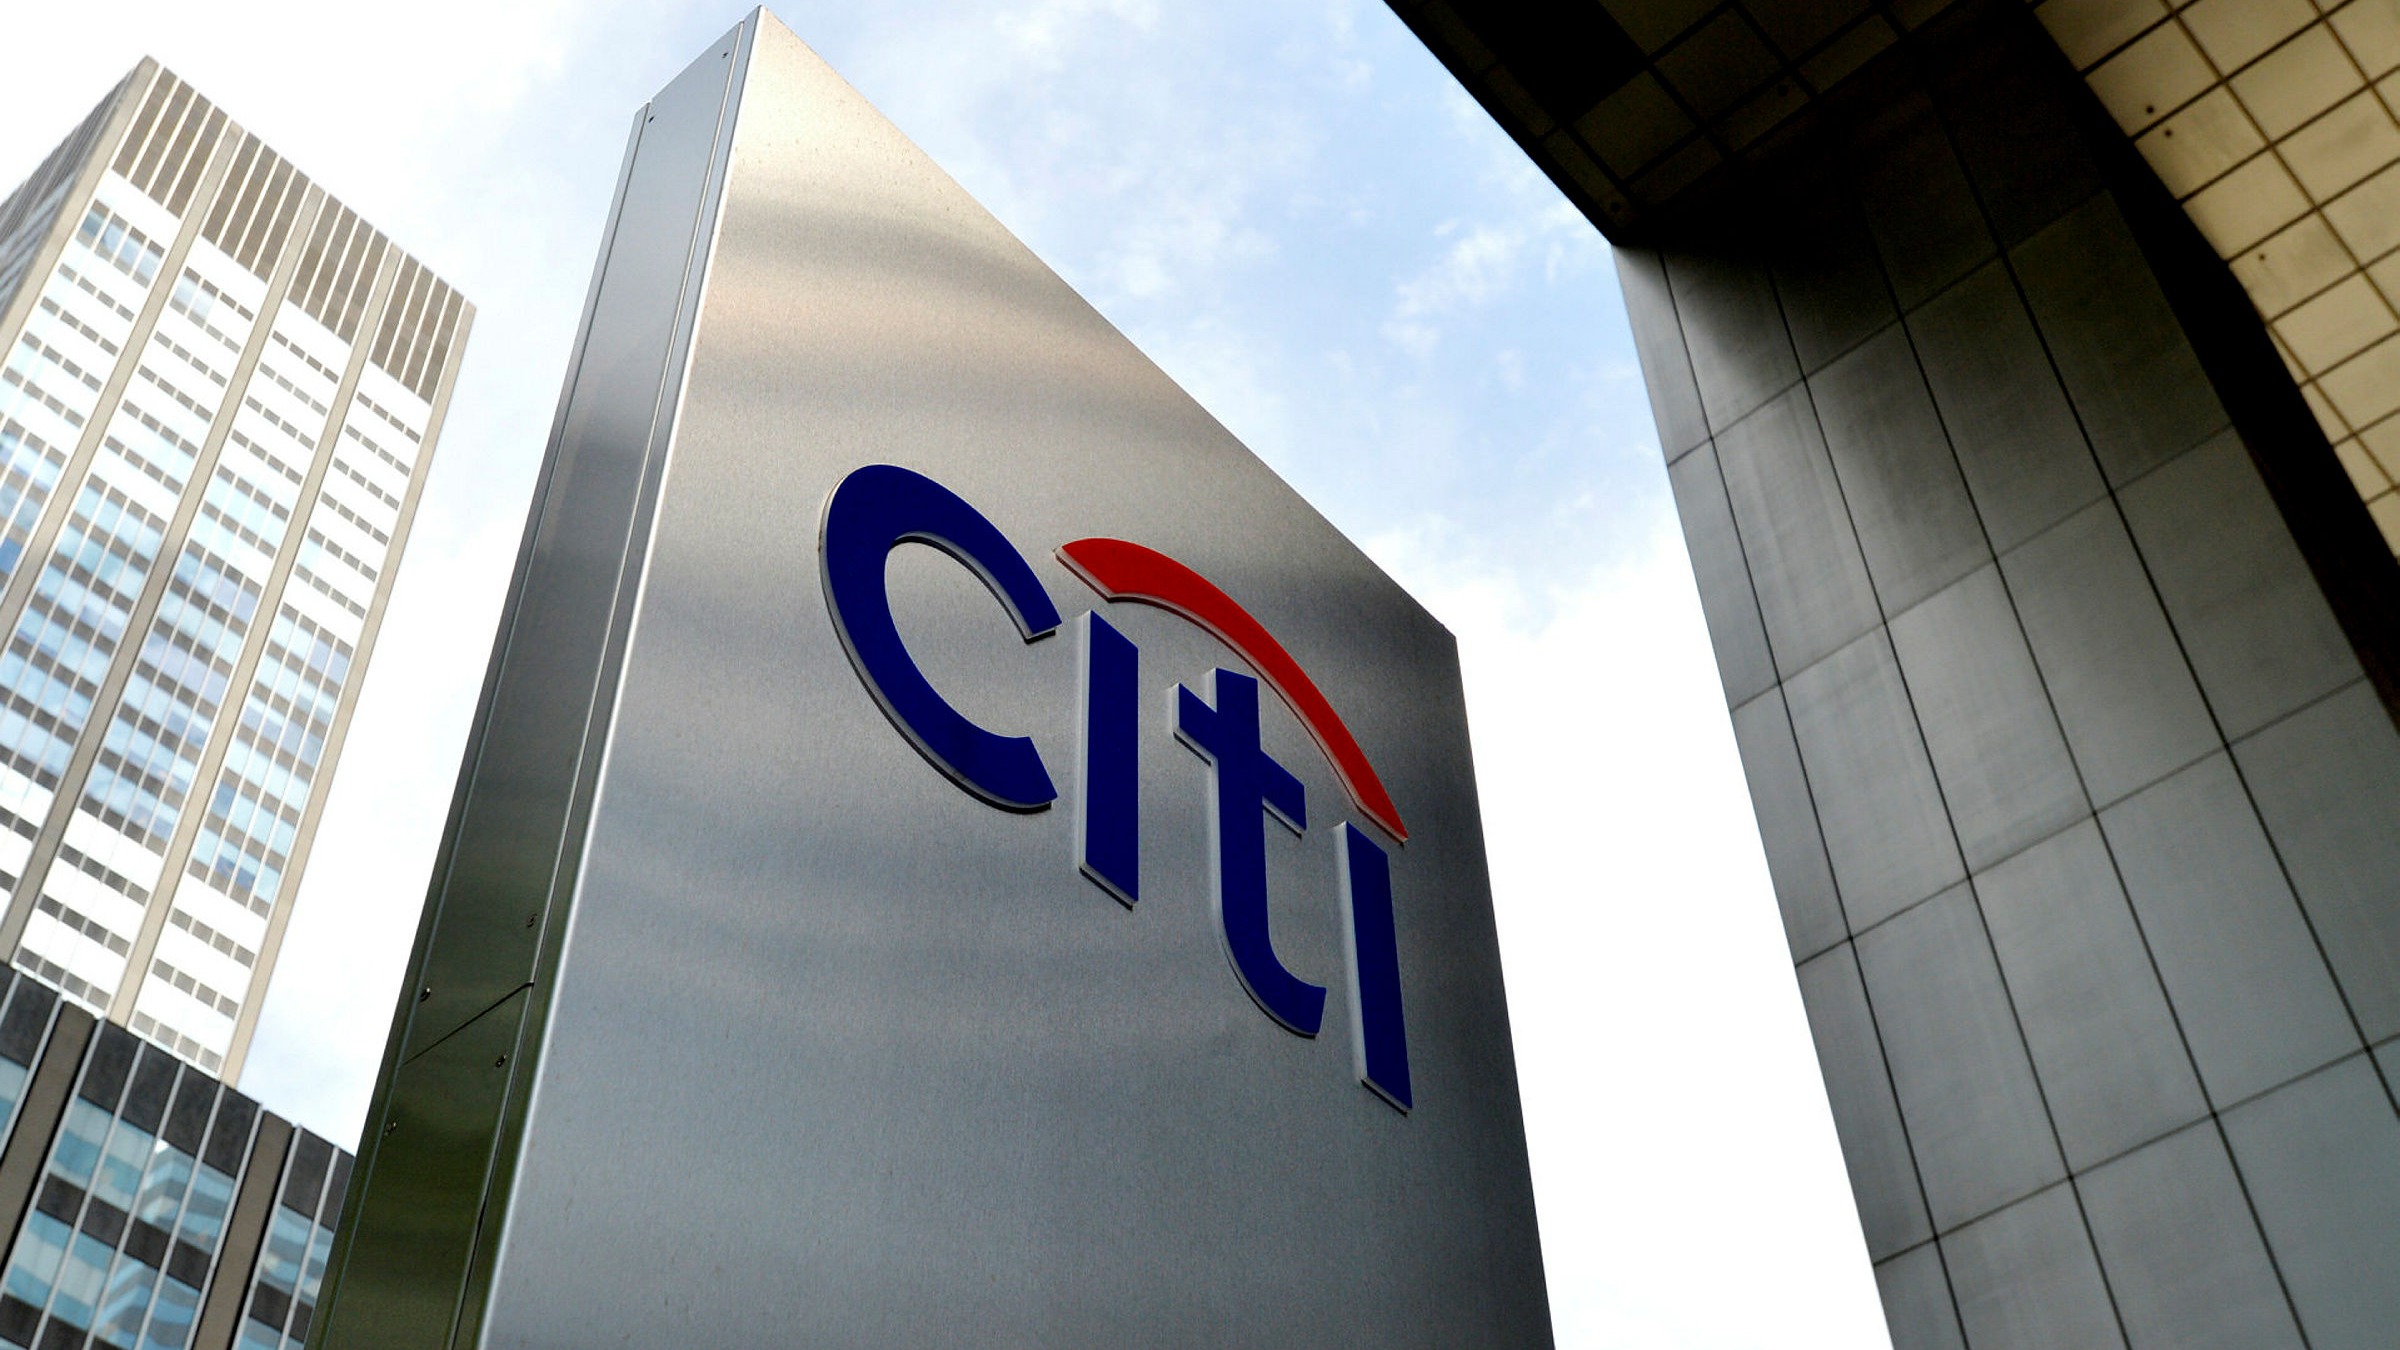 Citigroup records falling credit costs in sign of easing Covid strain | Financial Times